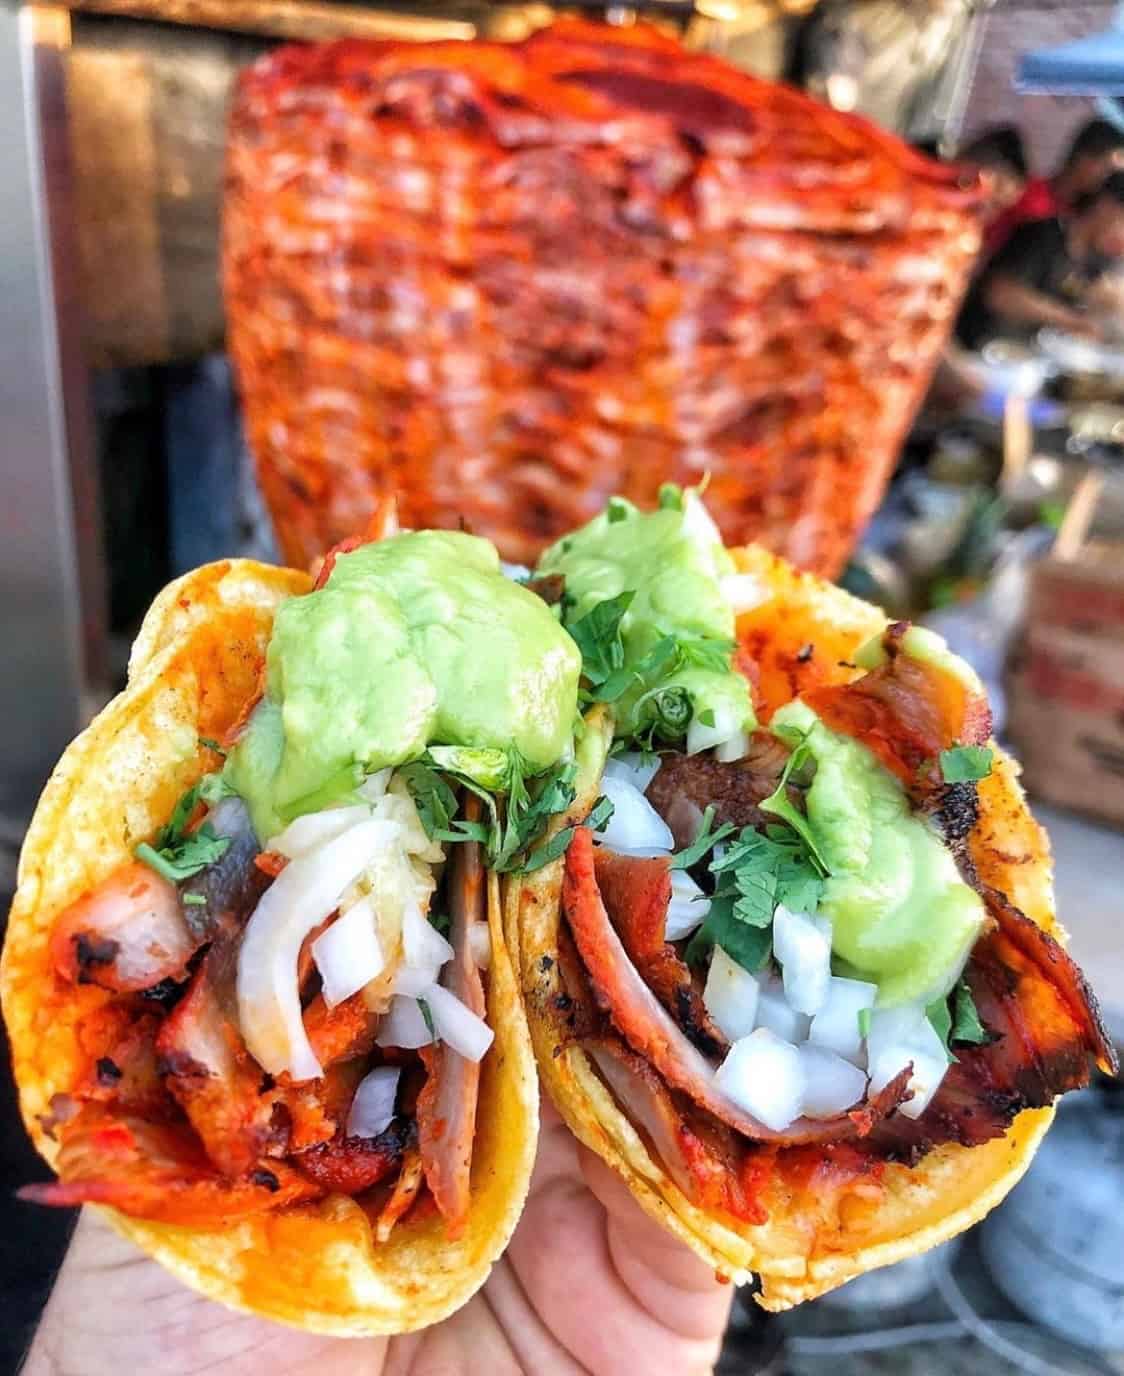 The best Tacos de asada in Jacksonville Florida! Grilled steak and corn tortillas. Served with onion, cilantro and lime.